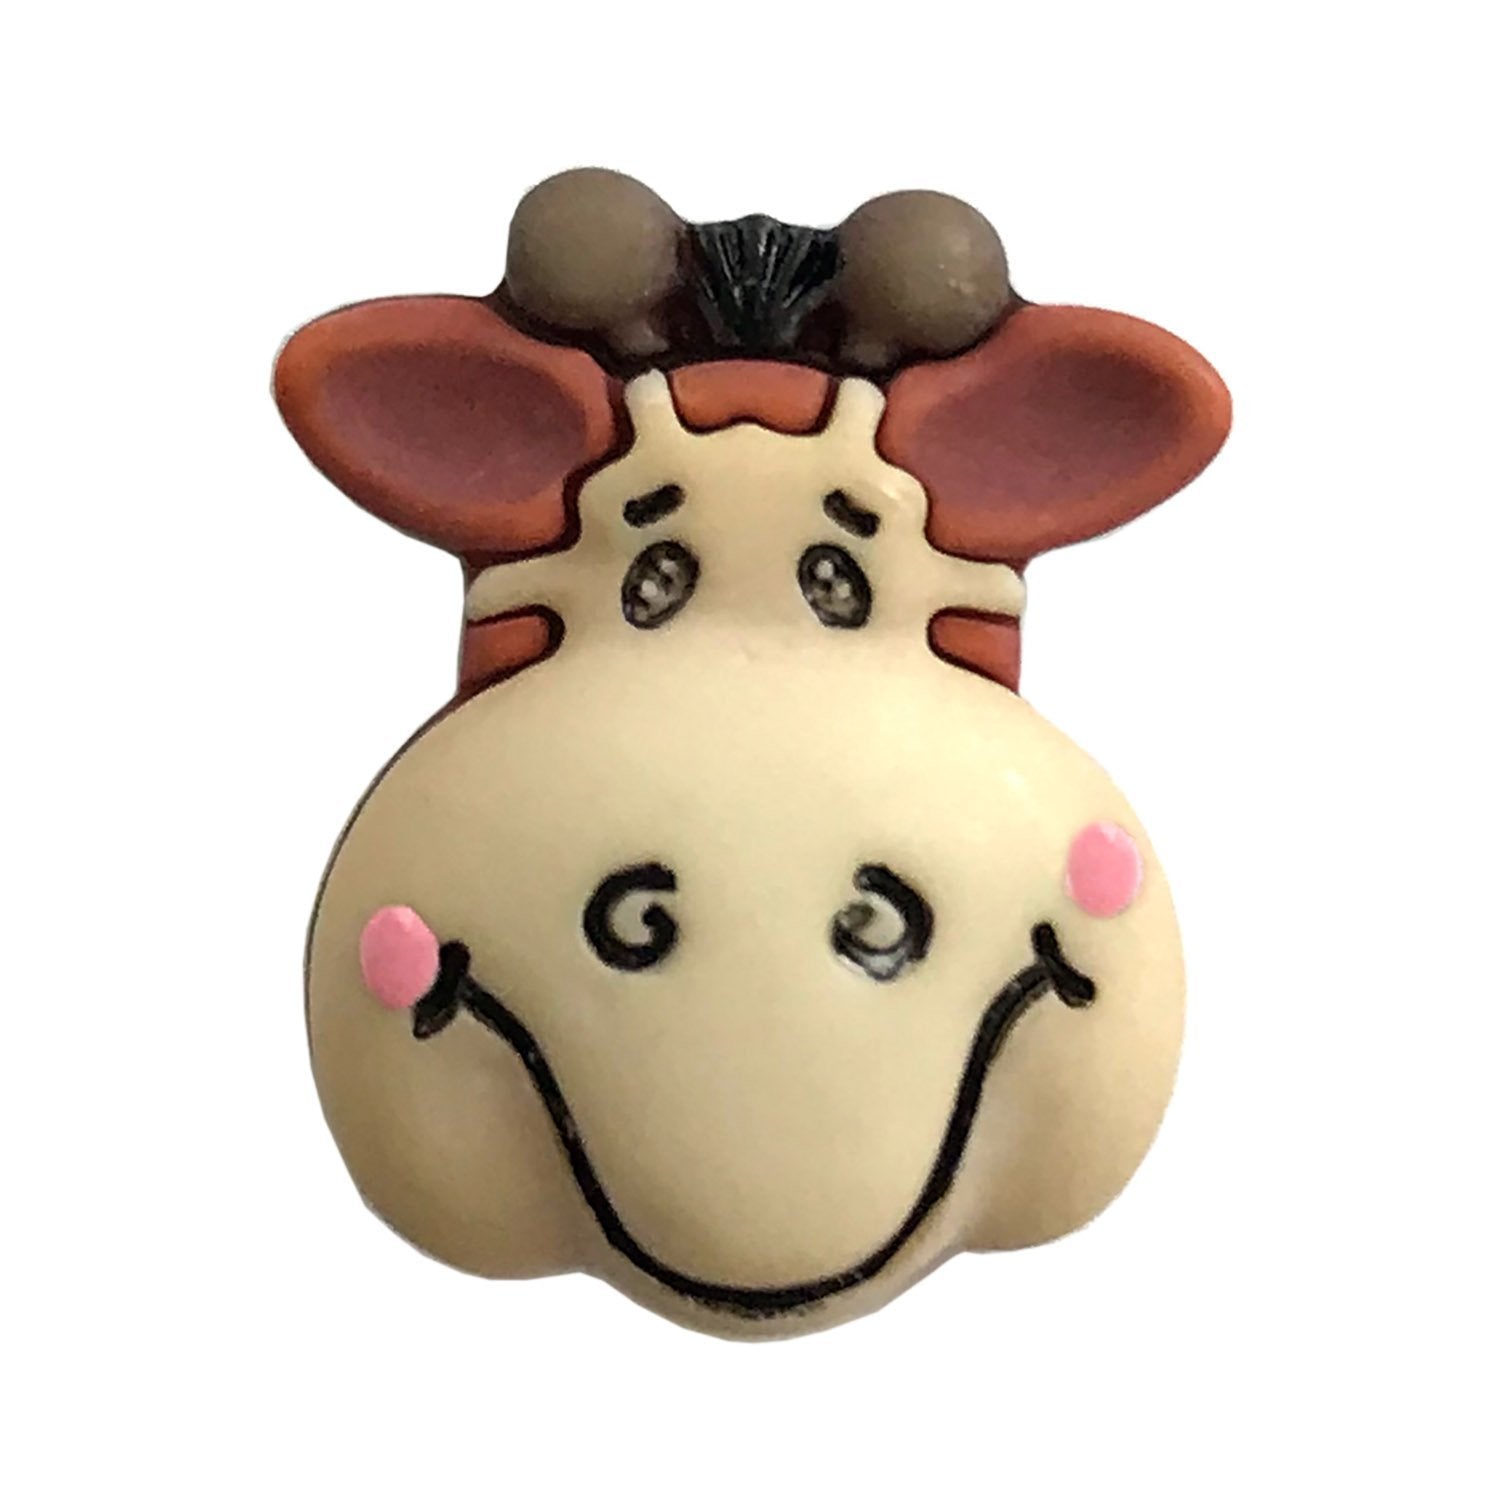 Gertrude The Giraffe - B1003 - Buttons Galore and More